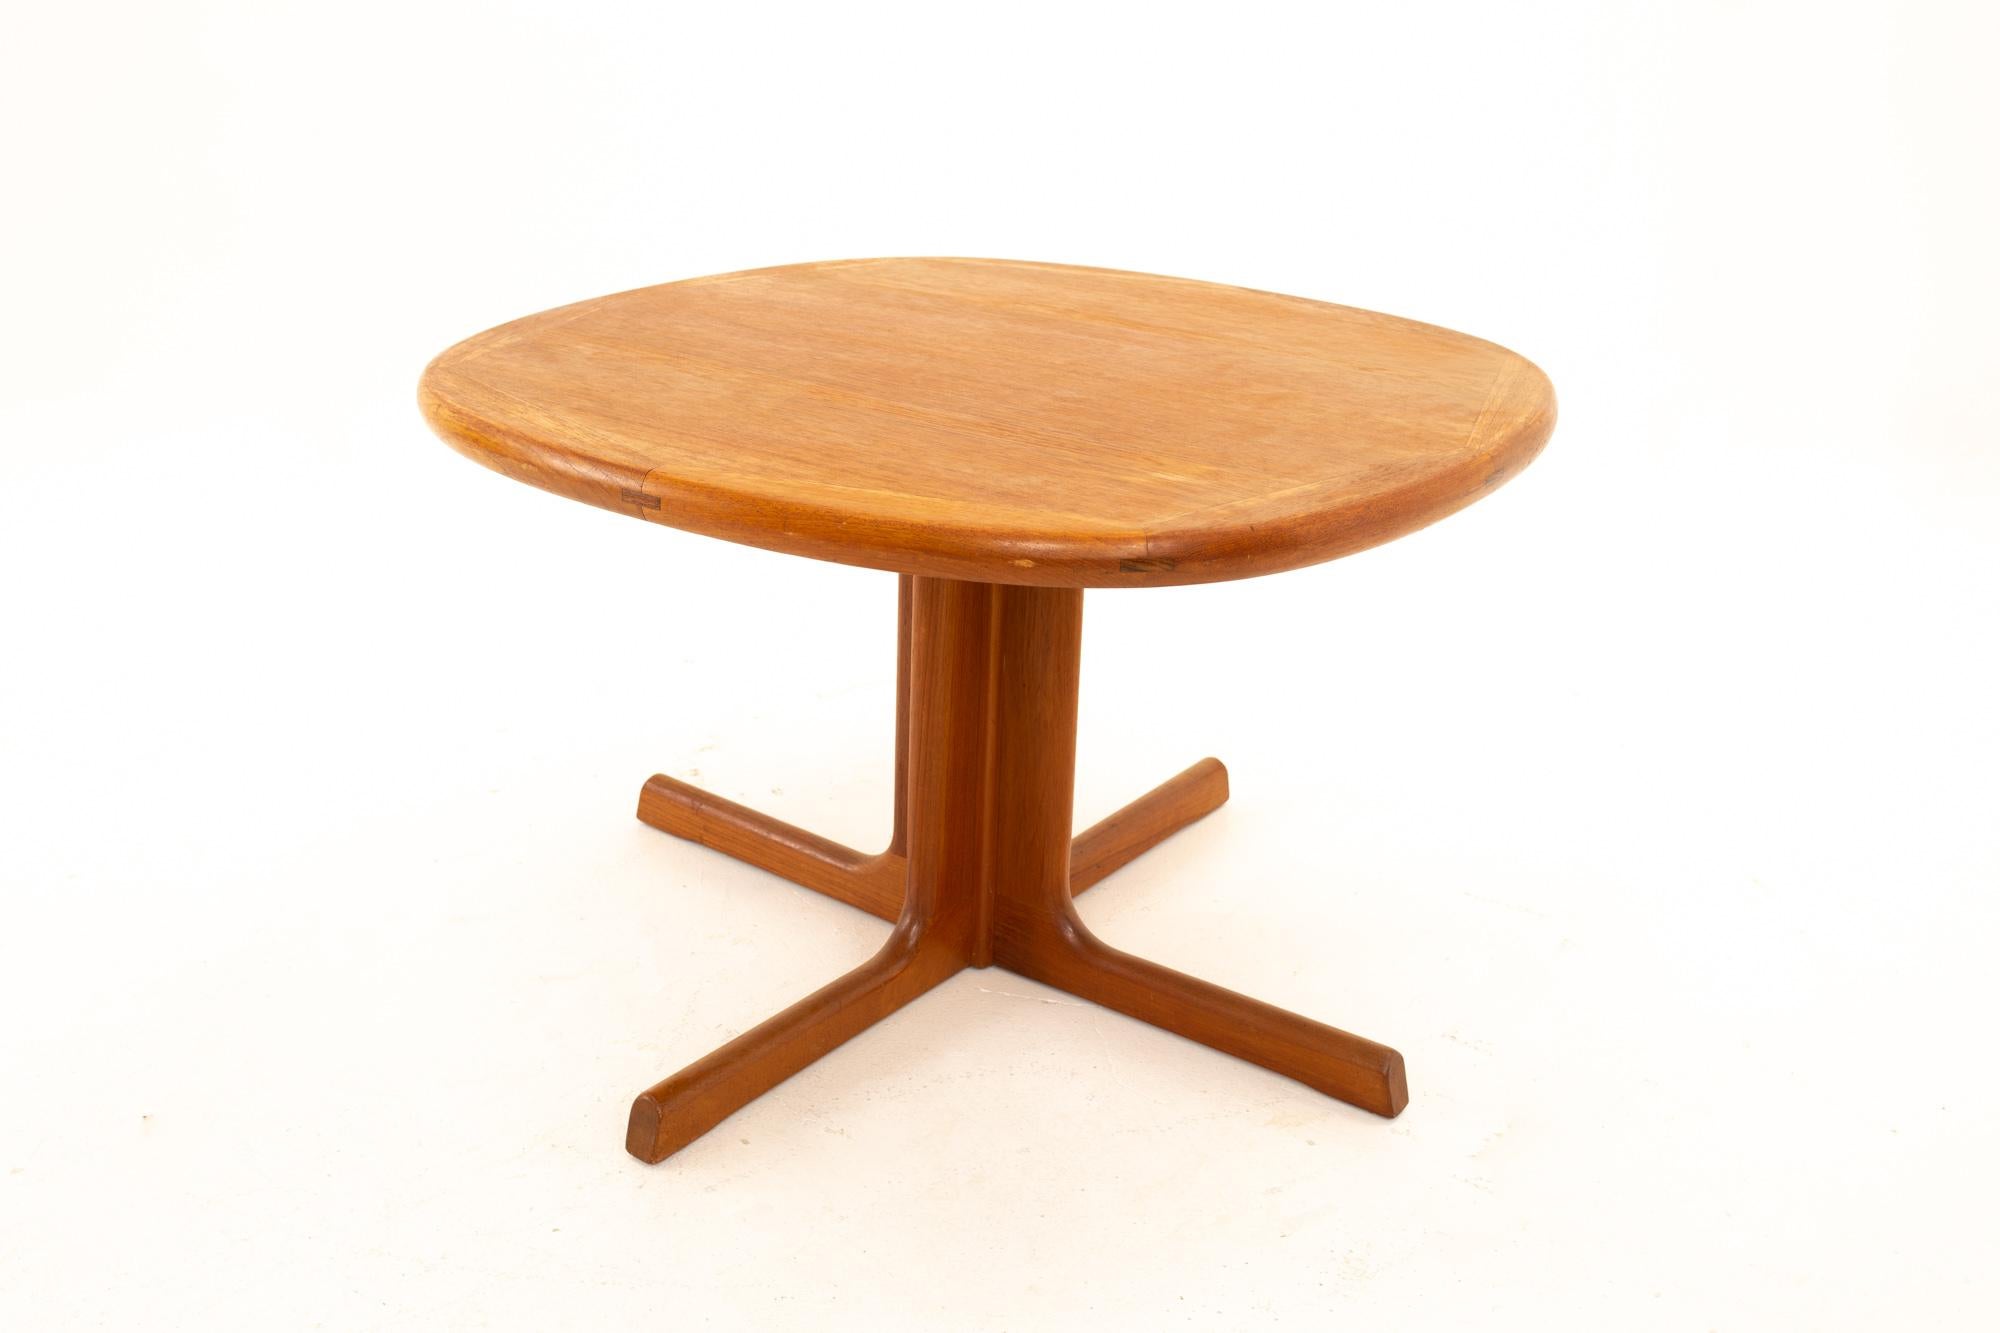 Dyrlund mid century teak small round coffee table
Table measures: 29.75 wide x 29.75 deep x 19.25

All pieces of furniture can be had in what we call restored vintage condition. That means the piece is restored upon purchase so it’s free of